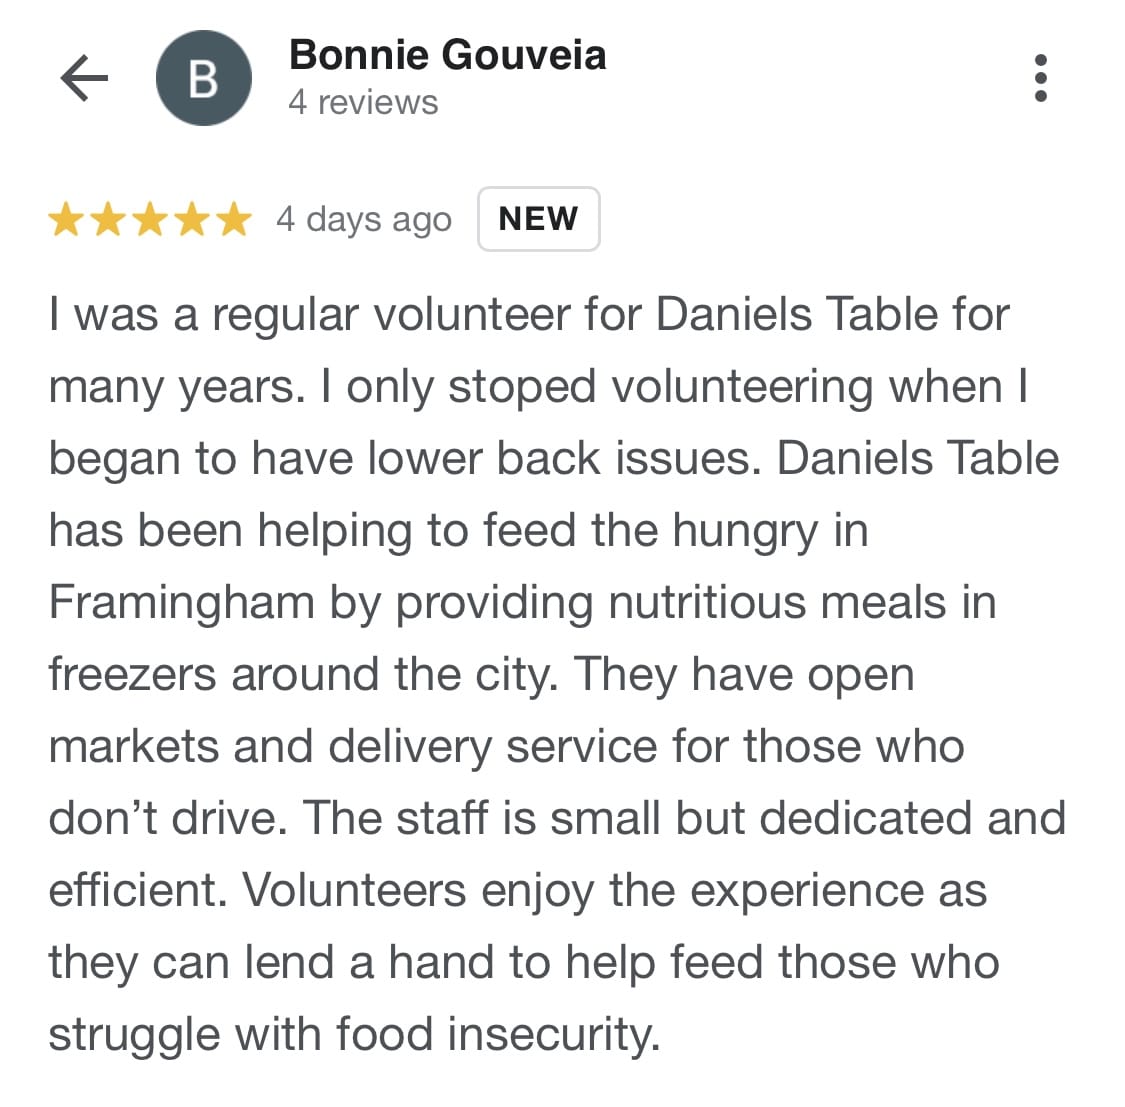 Bonnie Gouvela Google Review says how wonderful it is to volunteer at Daniel's Table